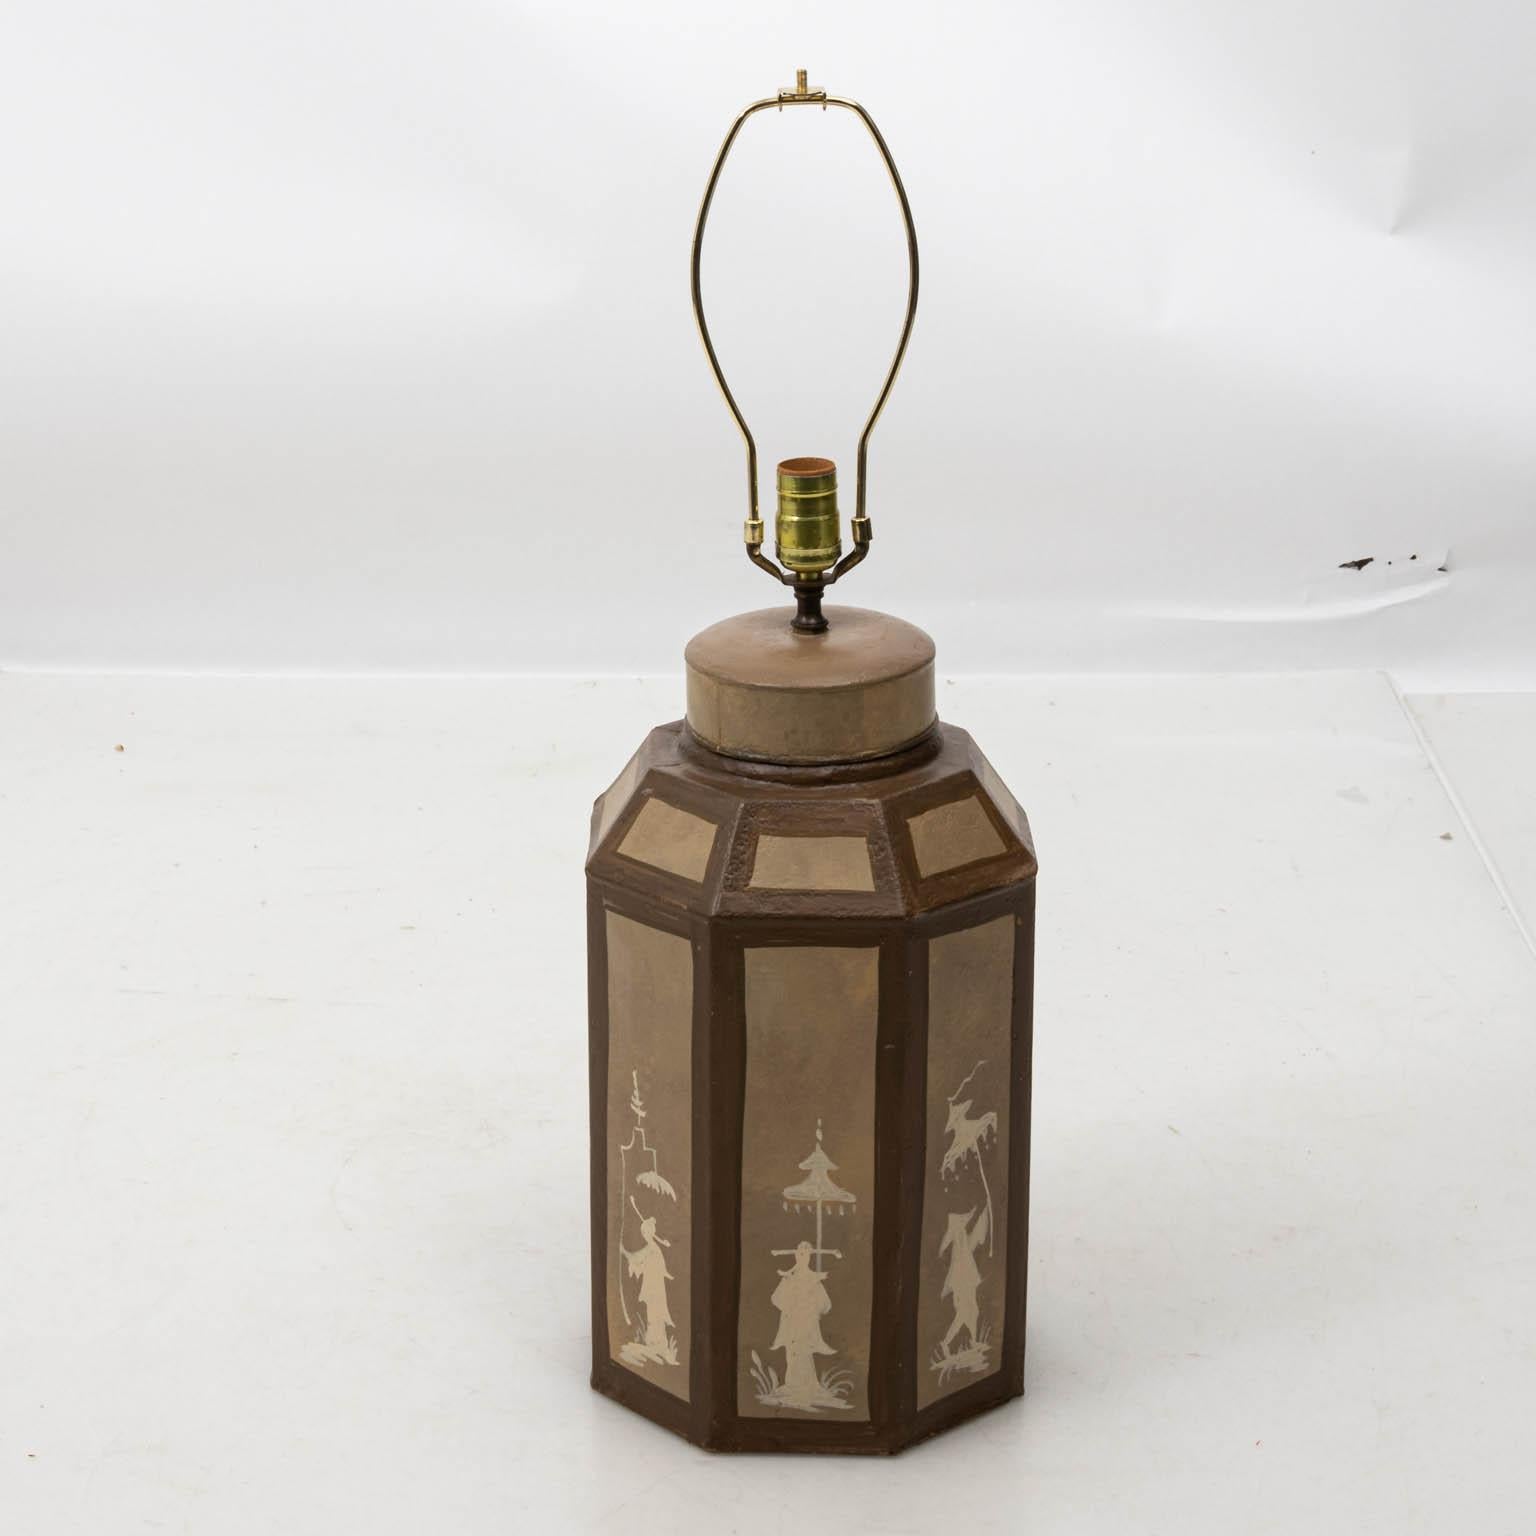 Hand painted chinoiserie style tole table lamp by Bob Christian with figural details, circa 1990s. Please note of wear consistent with age. Shade not included.